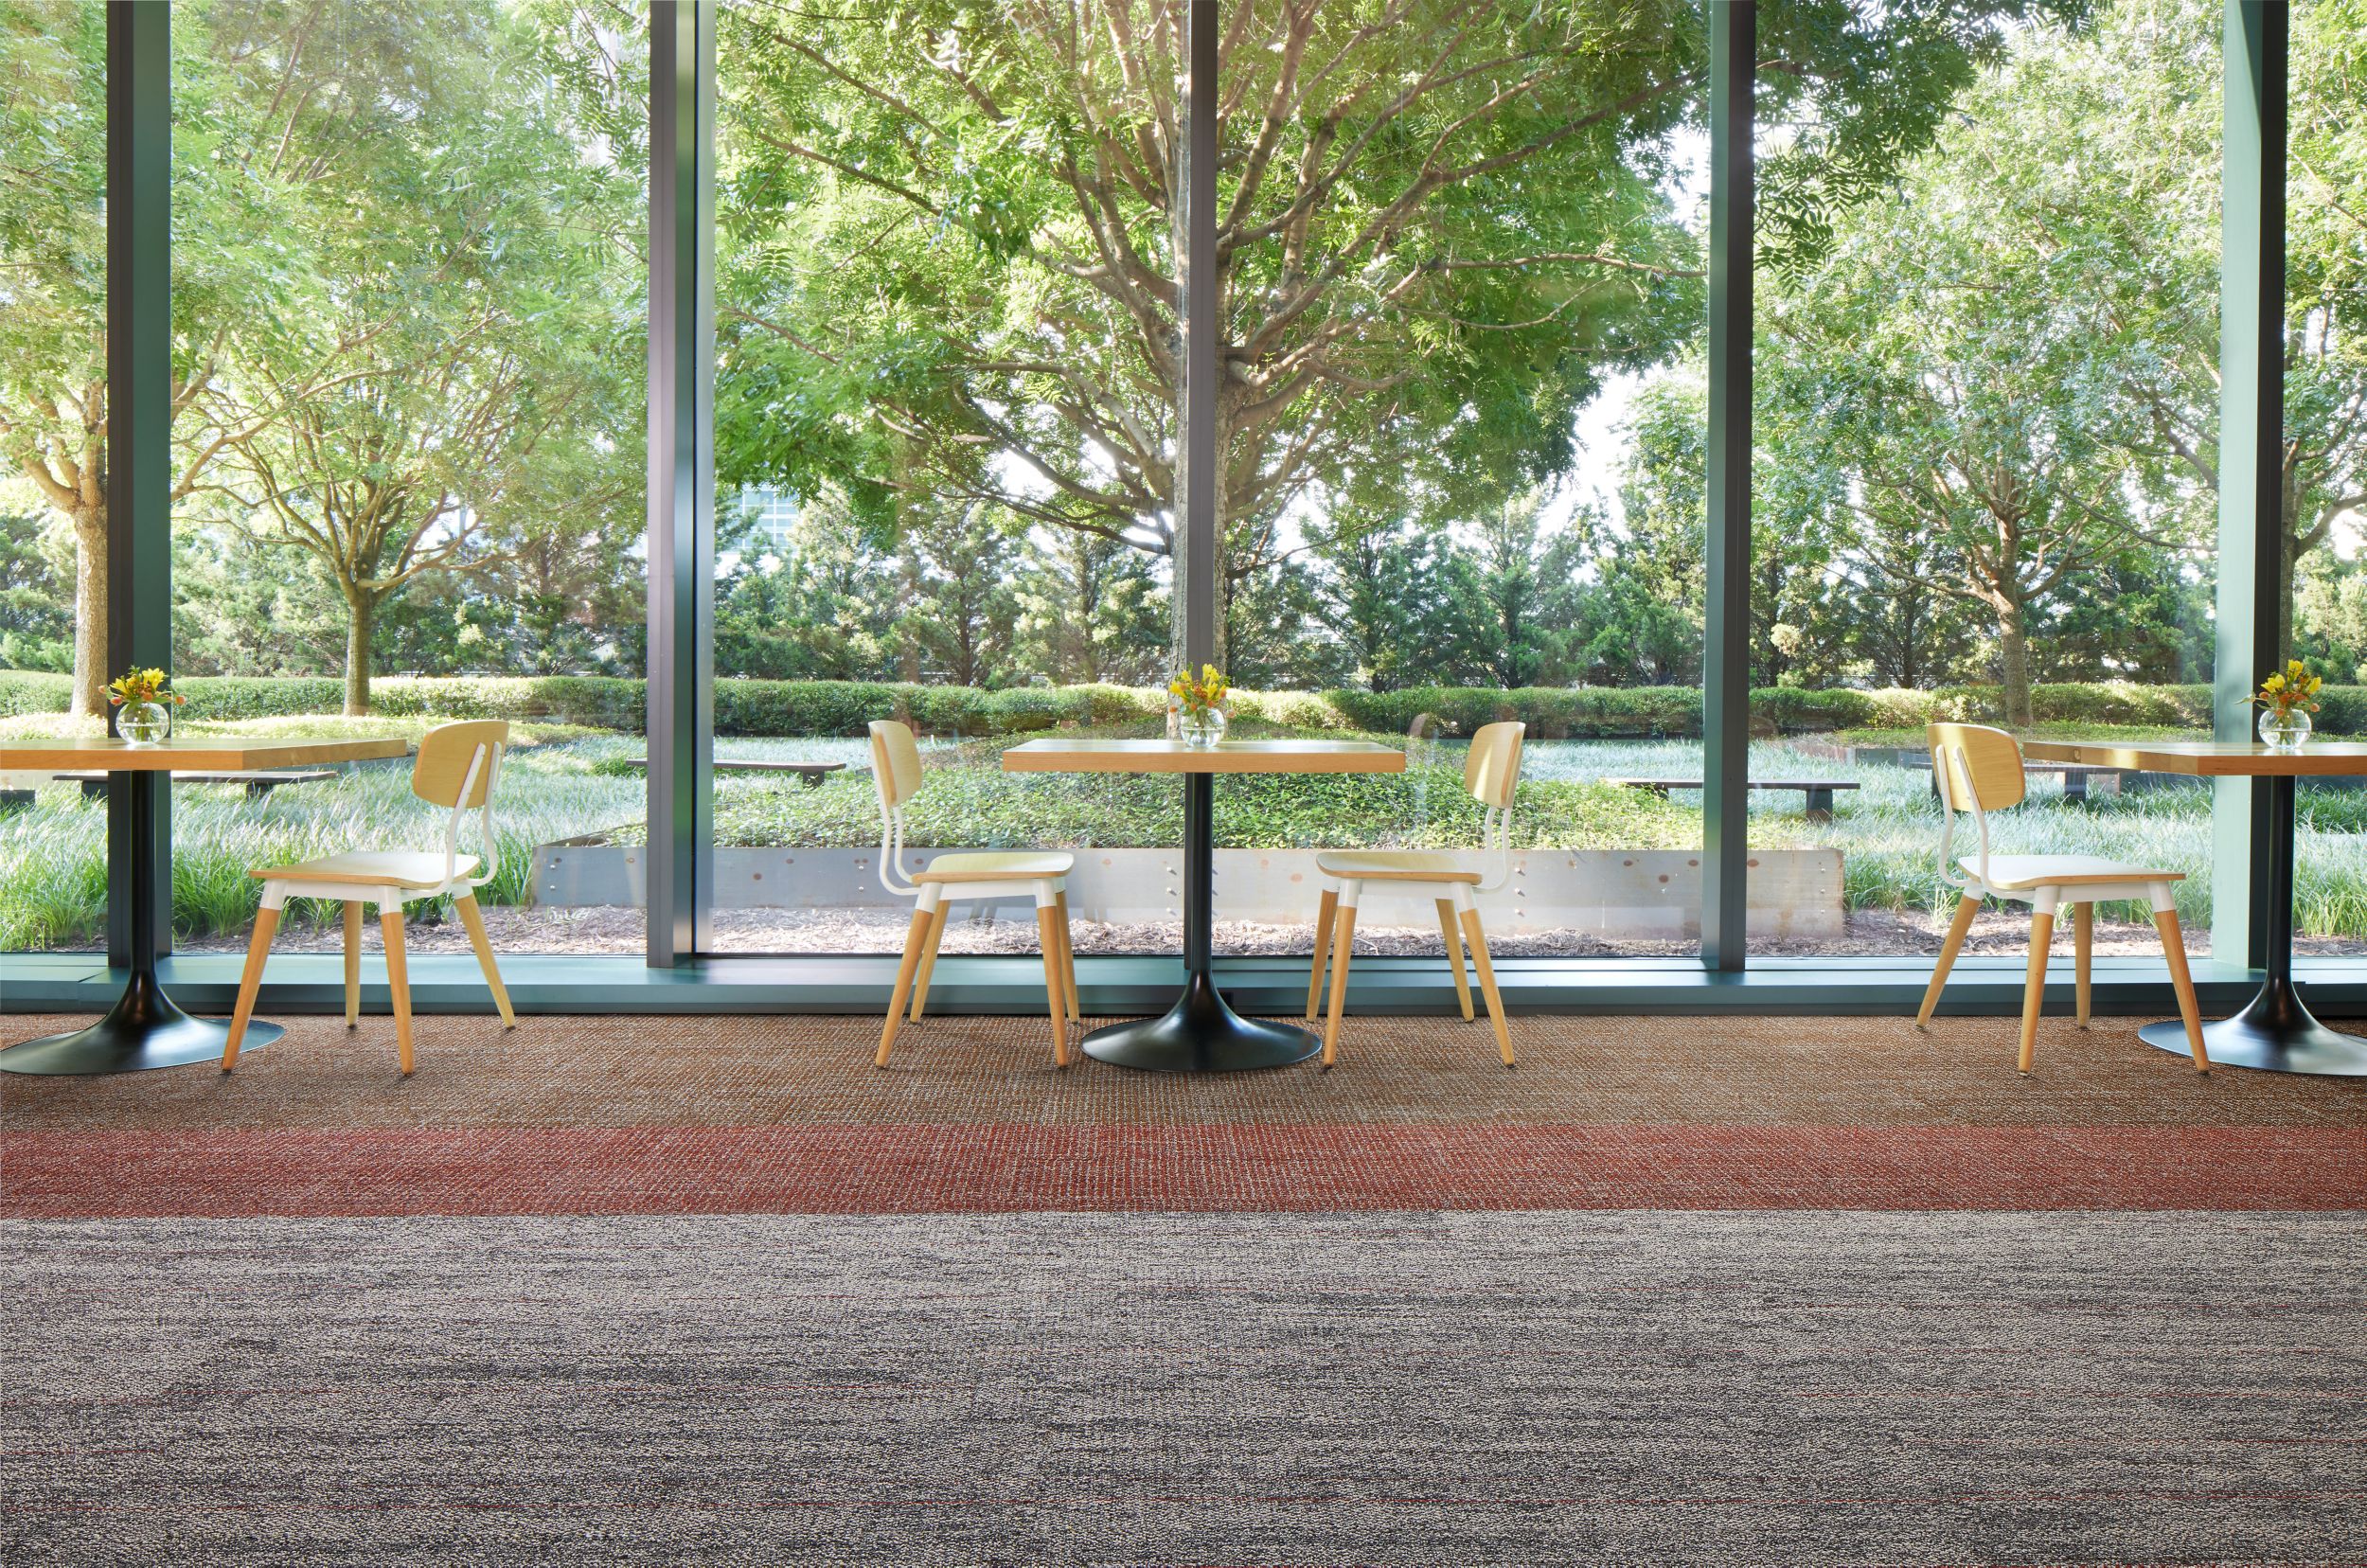 Interface Open Air Stria 402 and Open Ended carpet tile in lobby setting with tables and open plan windows numéro d’image 4